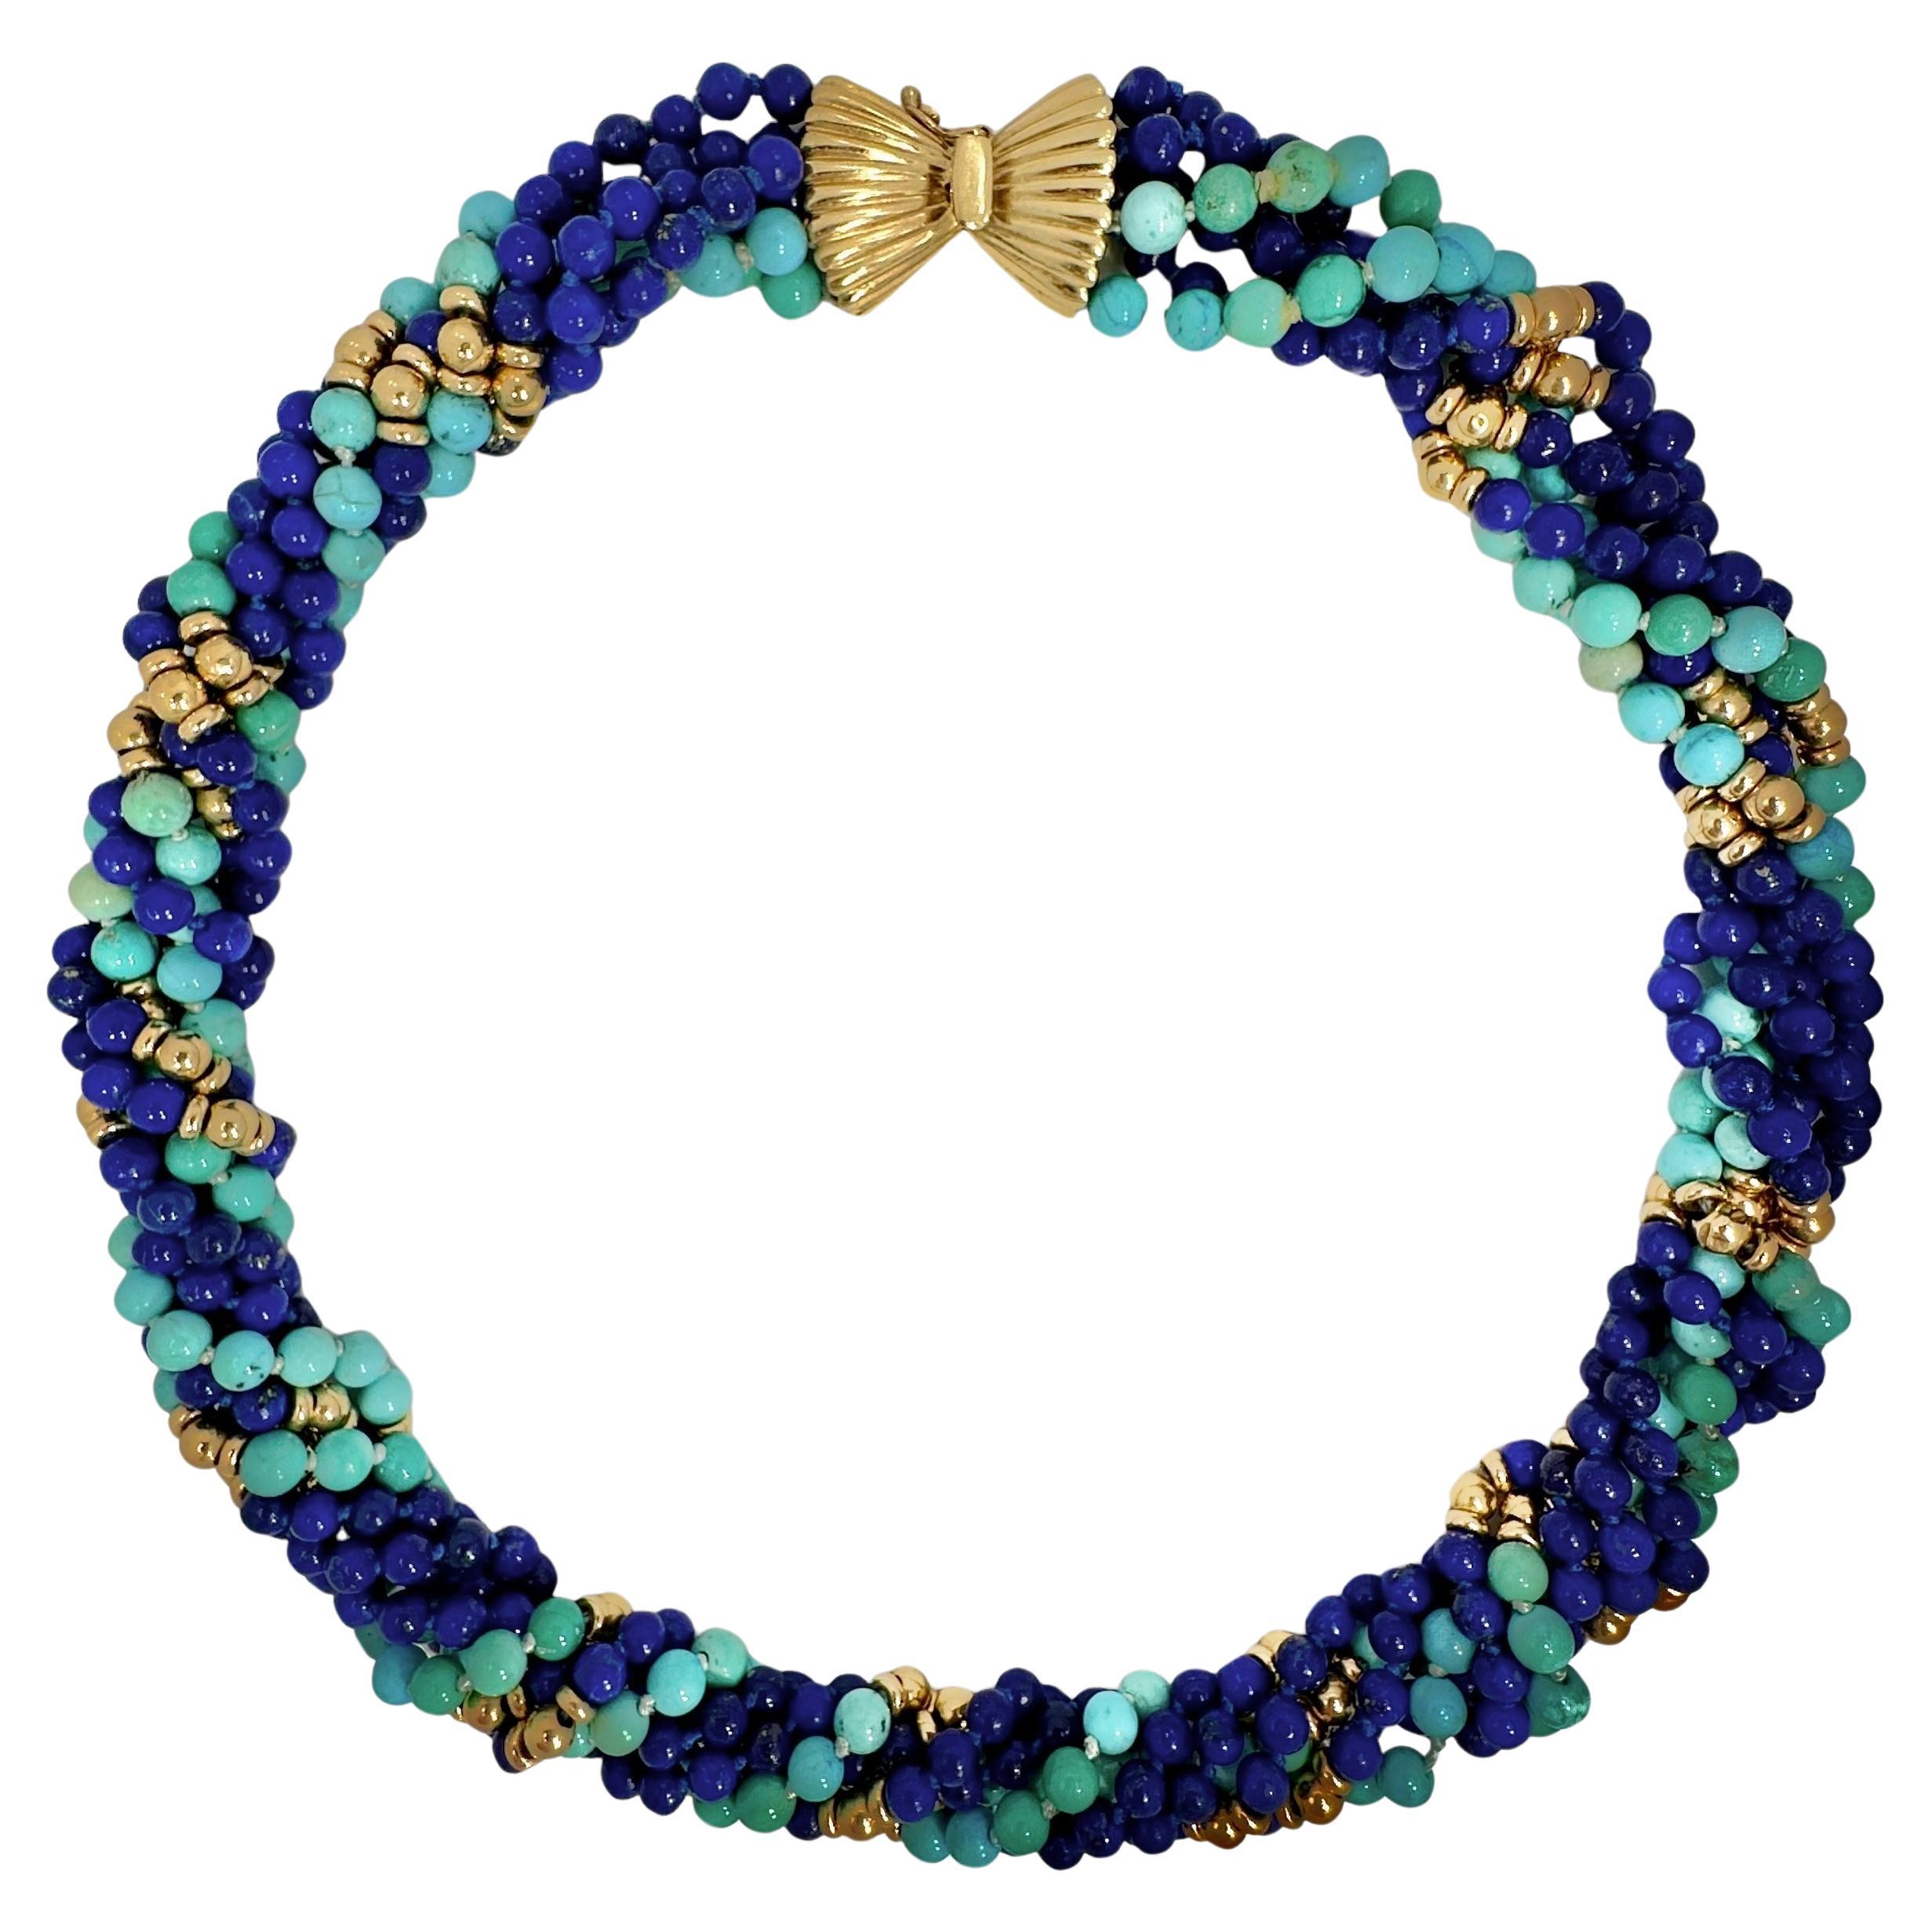 Classic Mid-20th Century Torsade Choker with Lapis, Turquoise and Gold Beads For Sale